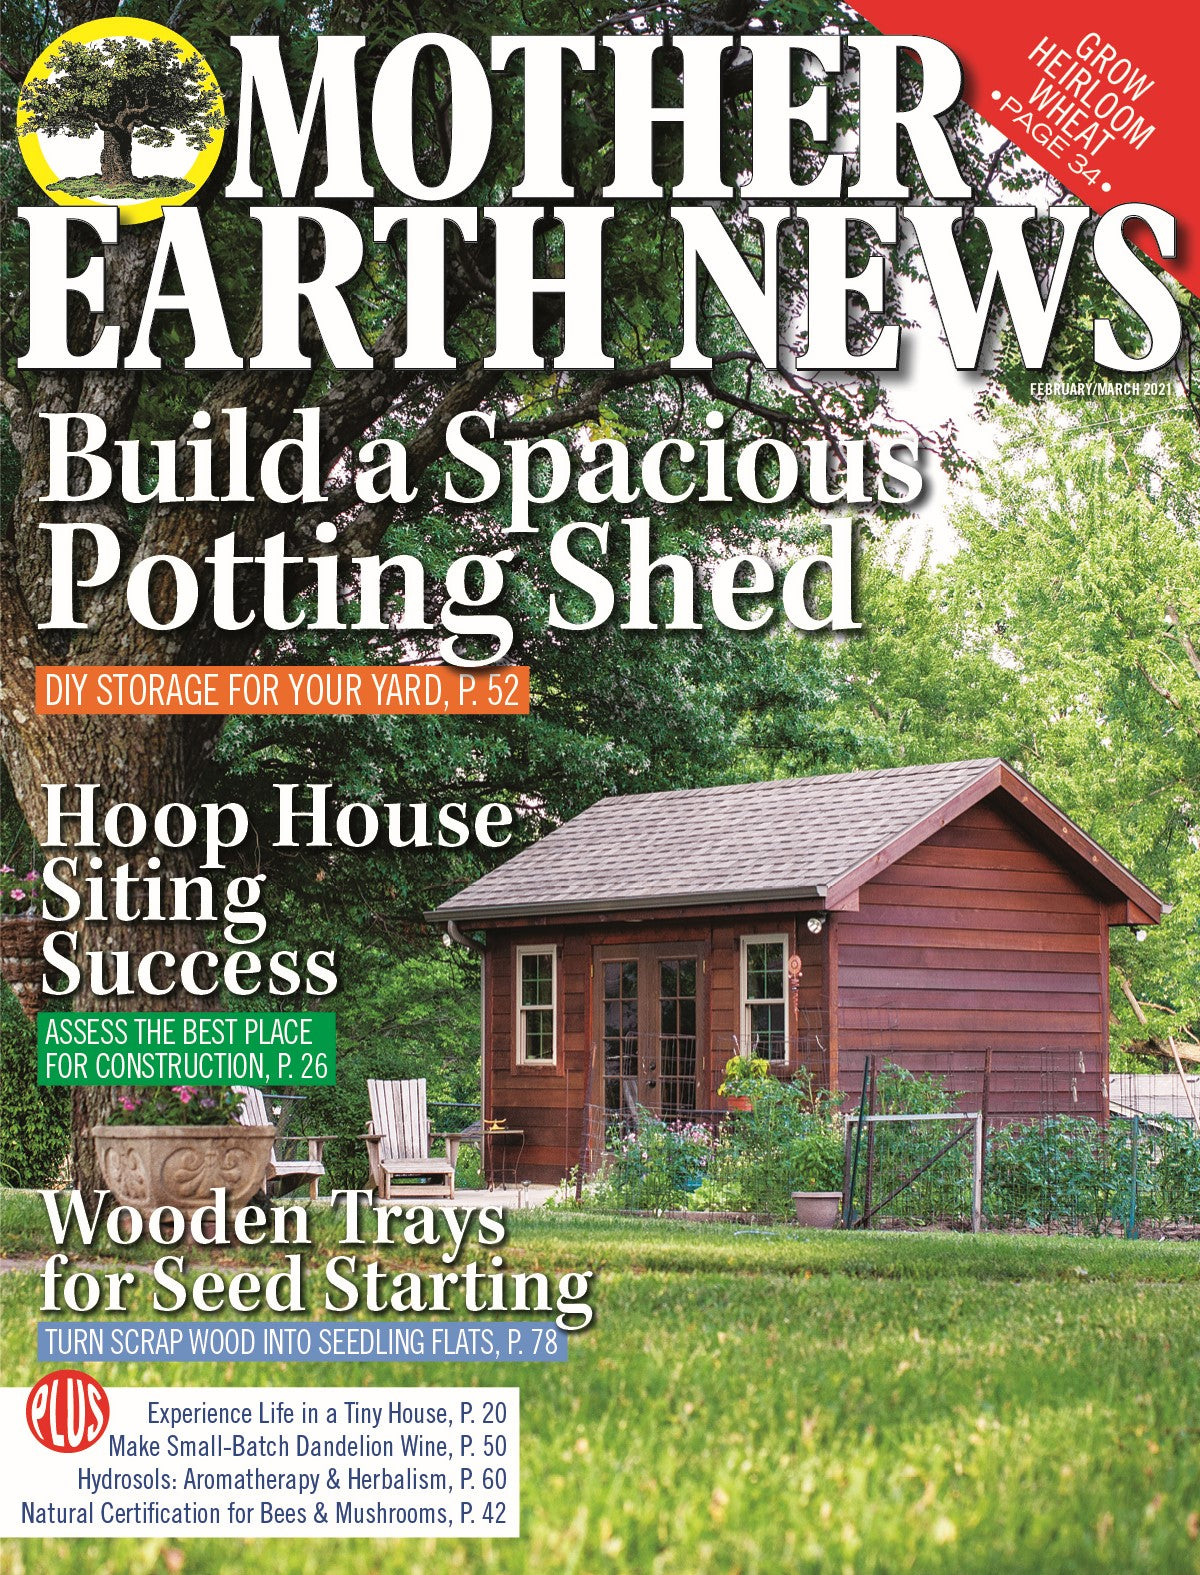 MOTHER EARTH NEWS FEBRUARY/MARCH 2021 #303